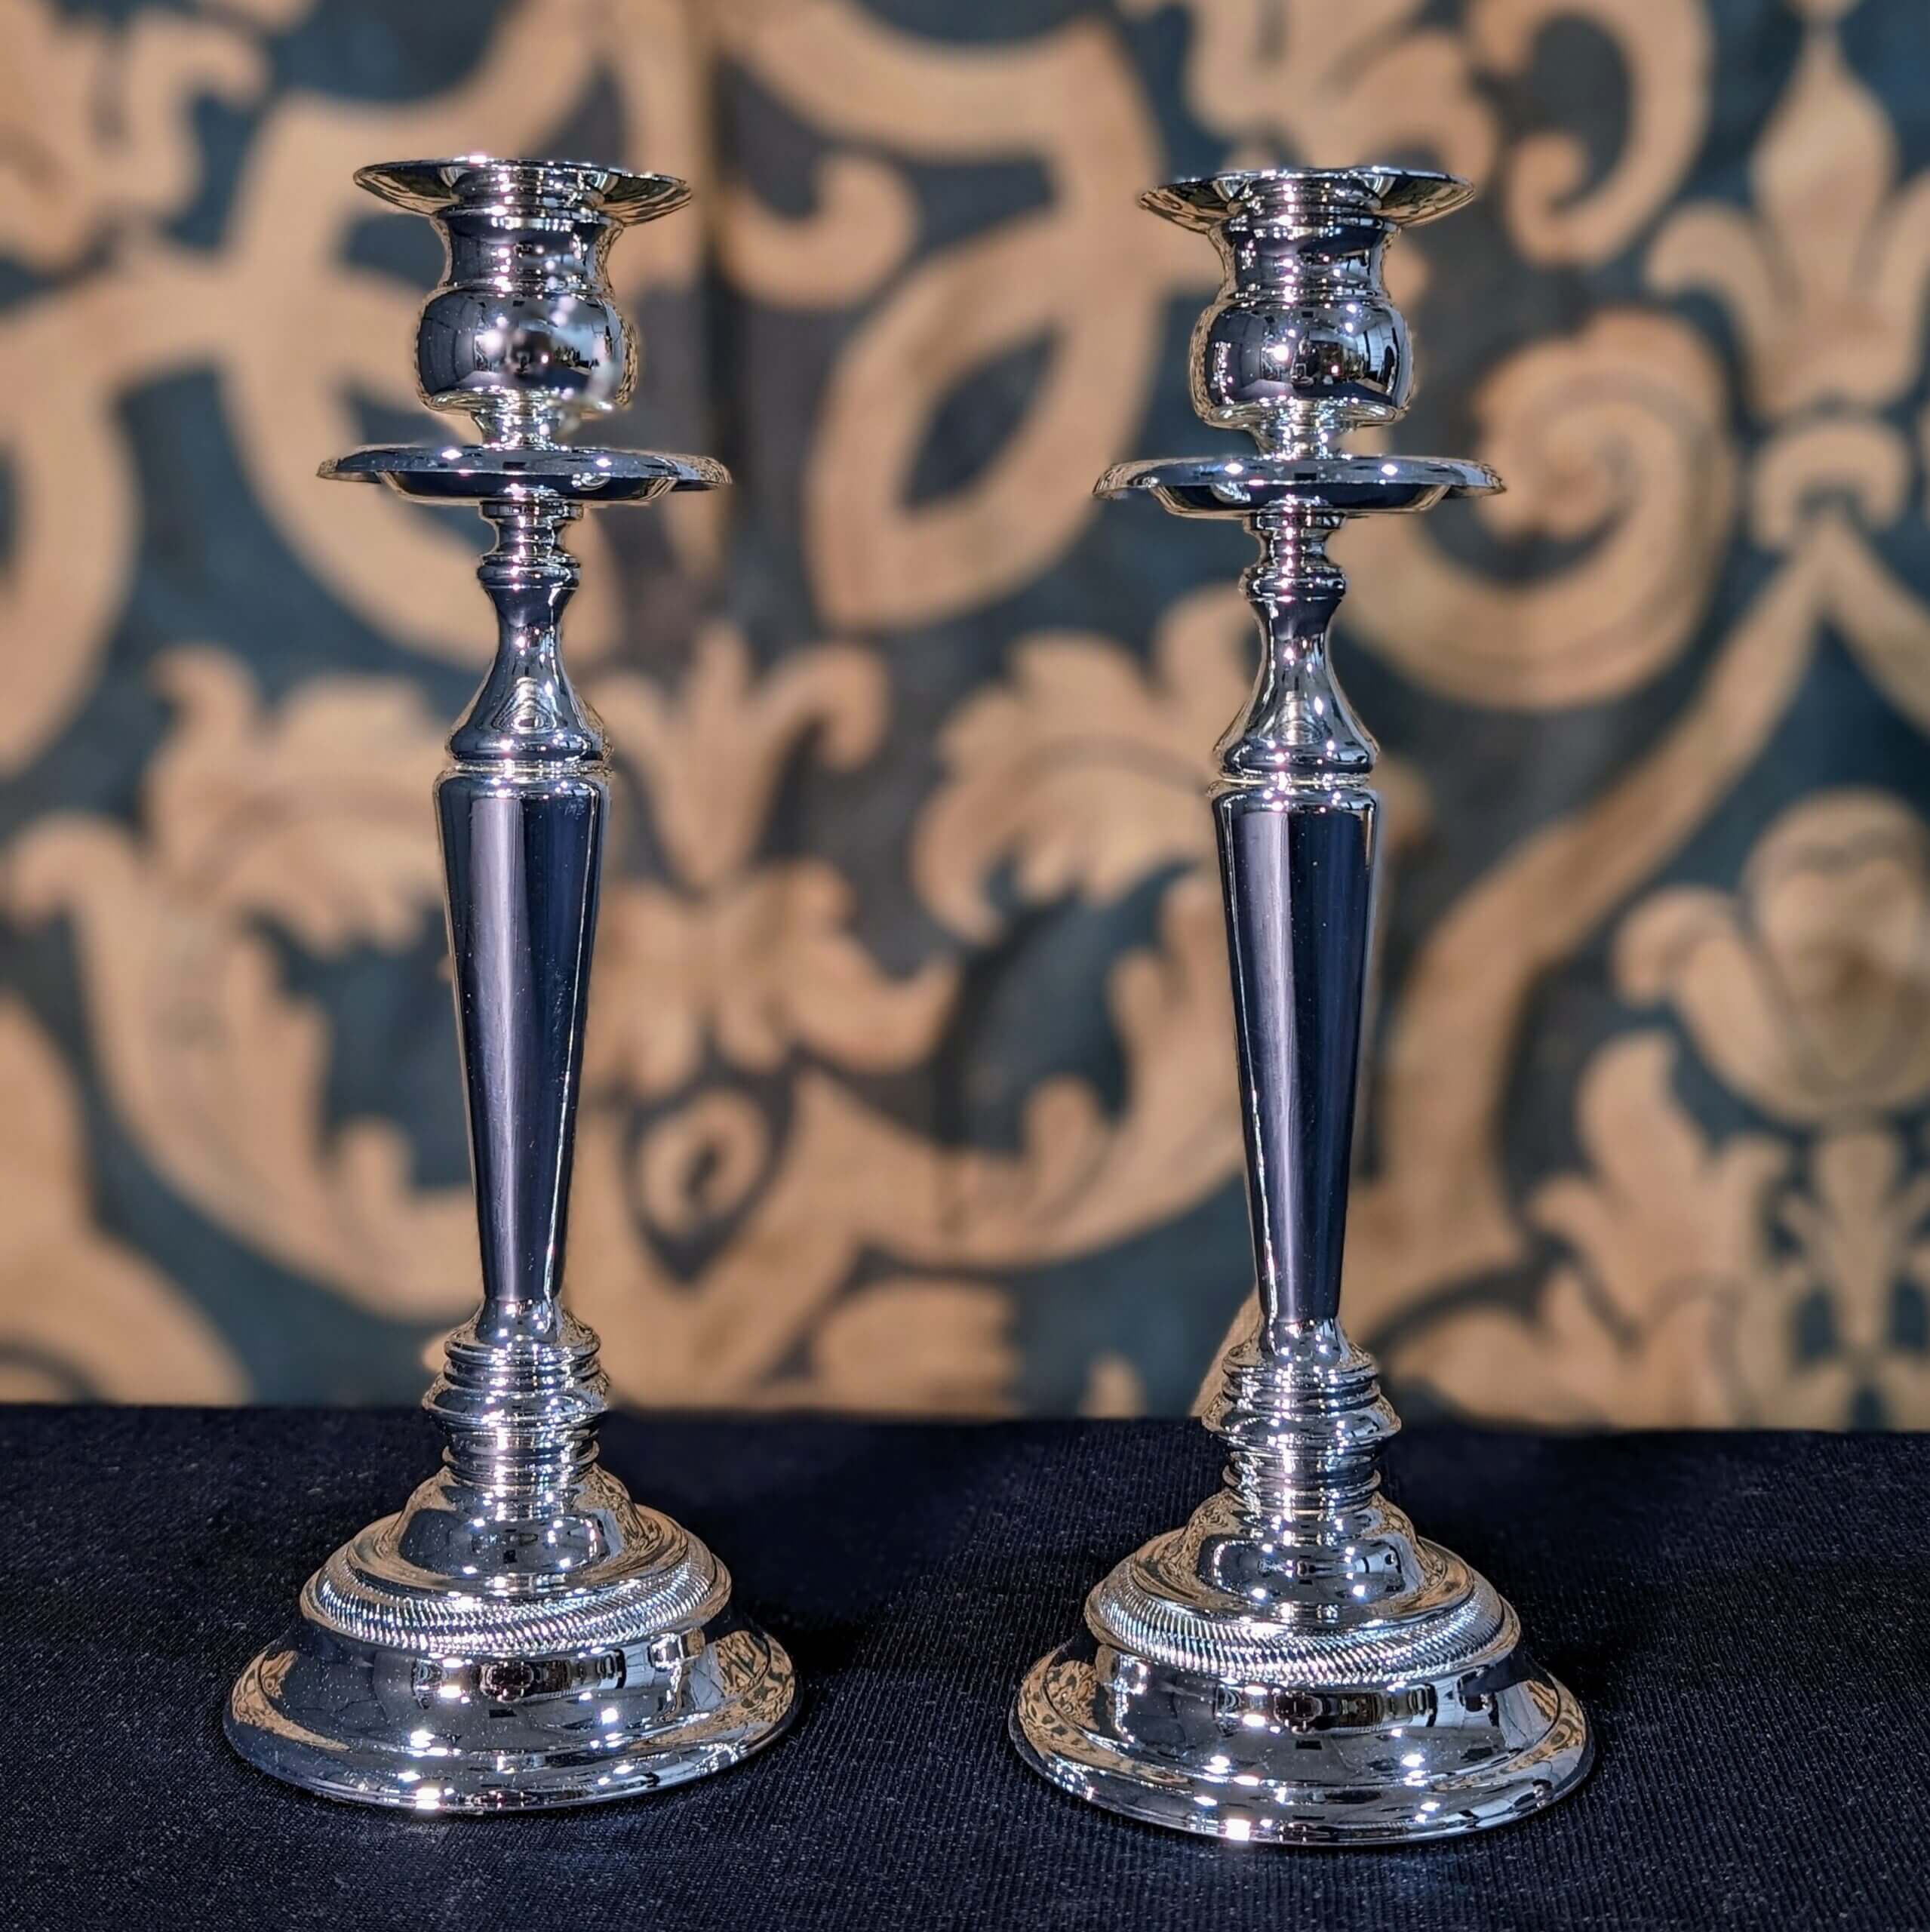 Large High Quality Antique Gothic Brass Church Altar Candlesticks with Claw  Feet (SOLD) - Antique Church Furnishings